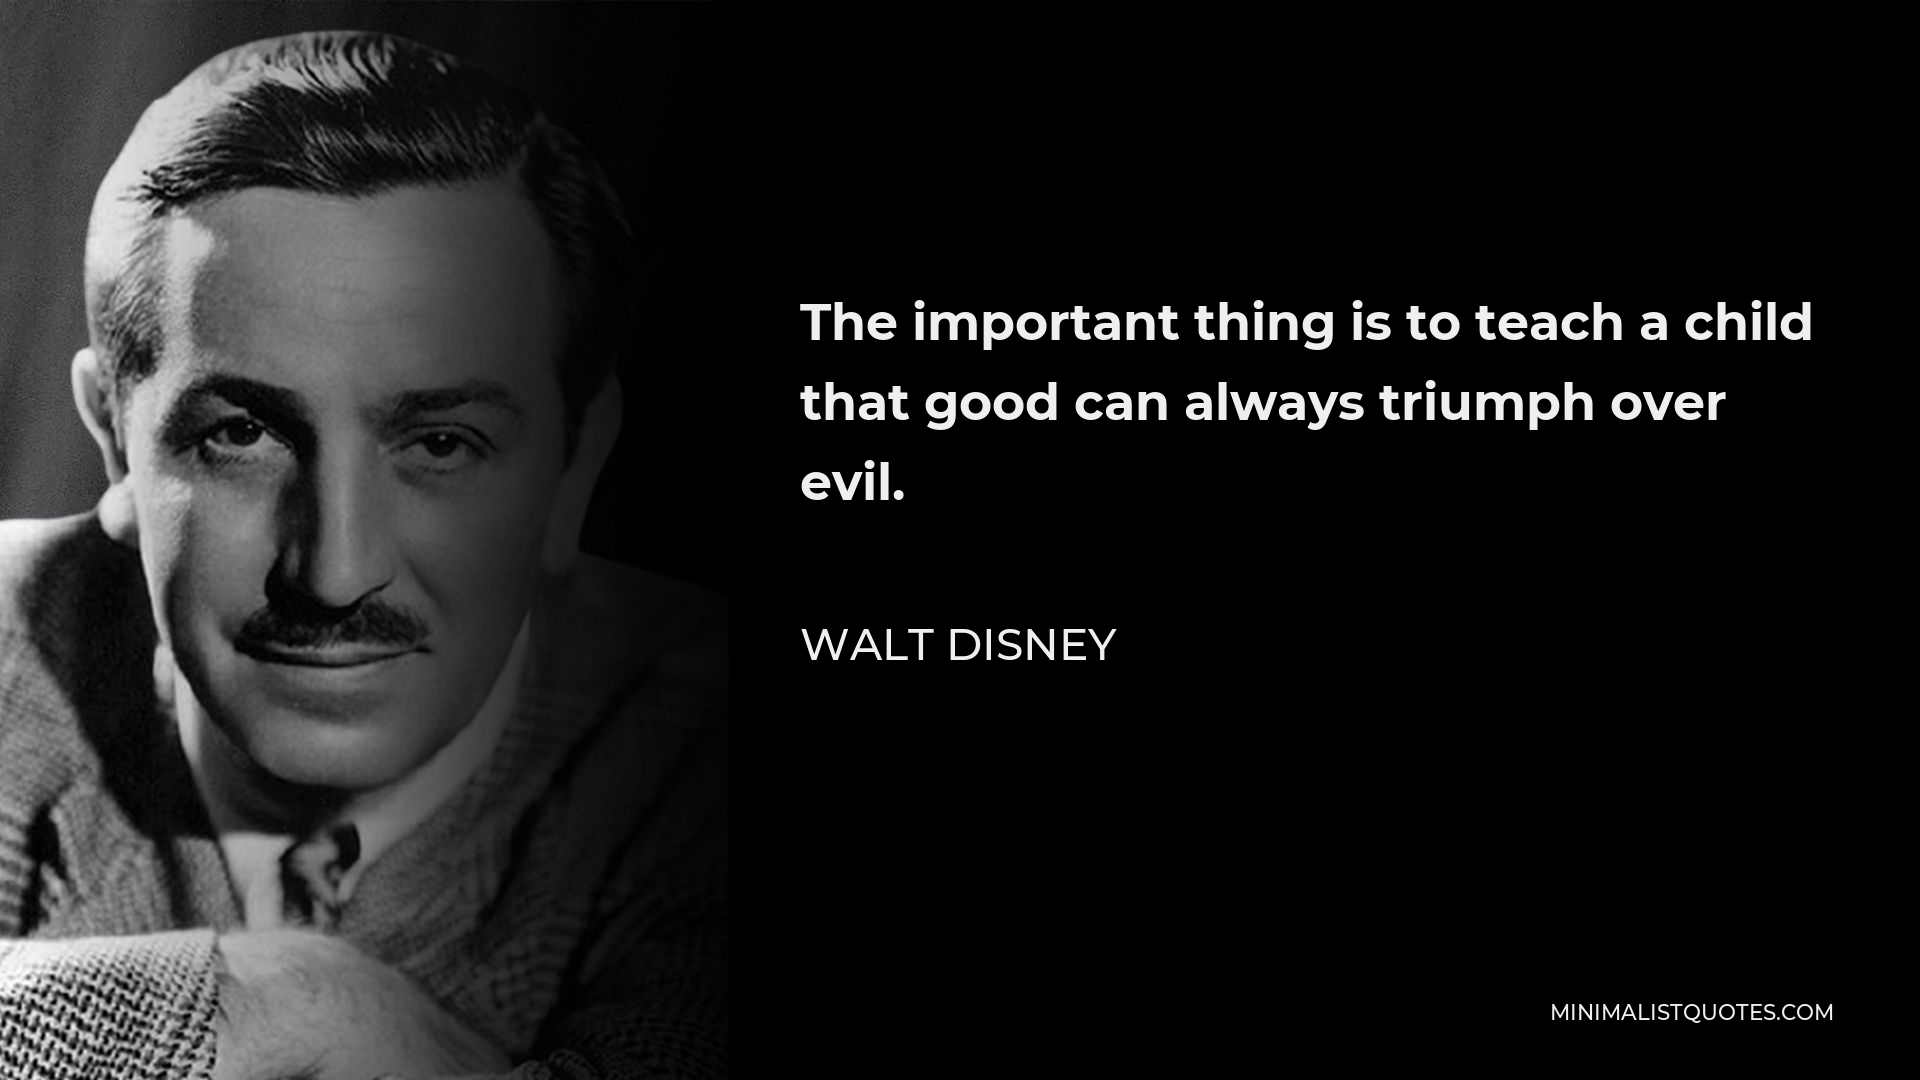 Walt Disney Quote - The important thing is to teach a child that good can always triumph over evil.